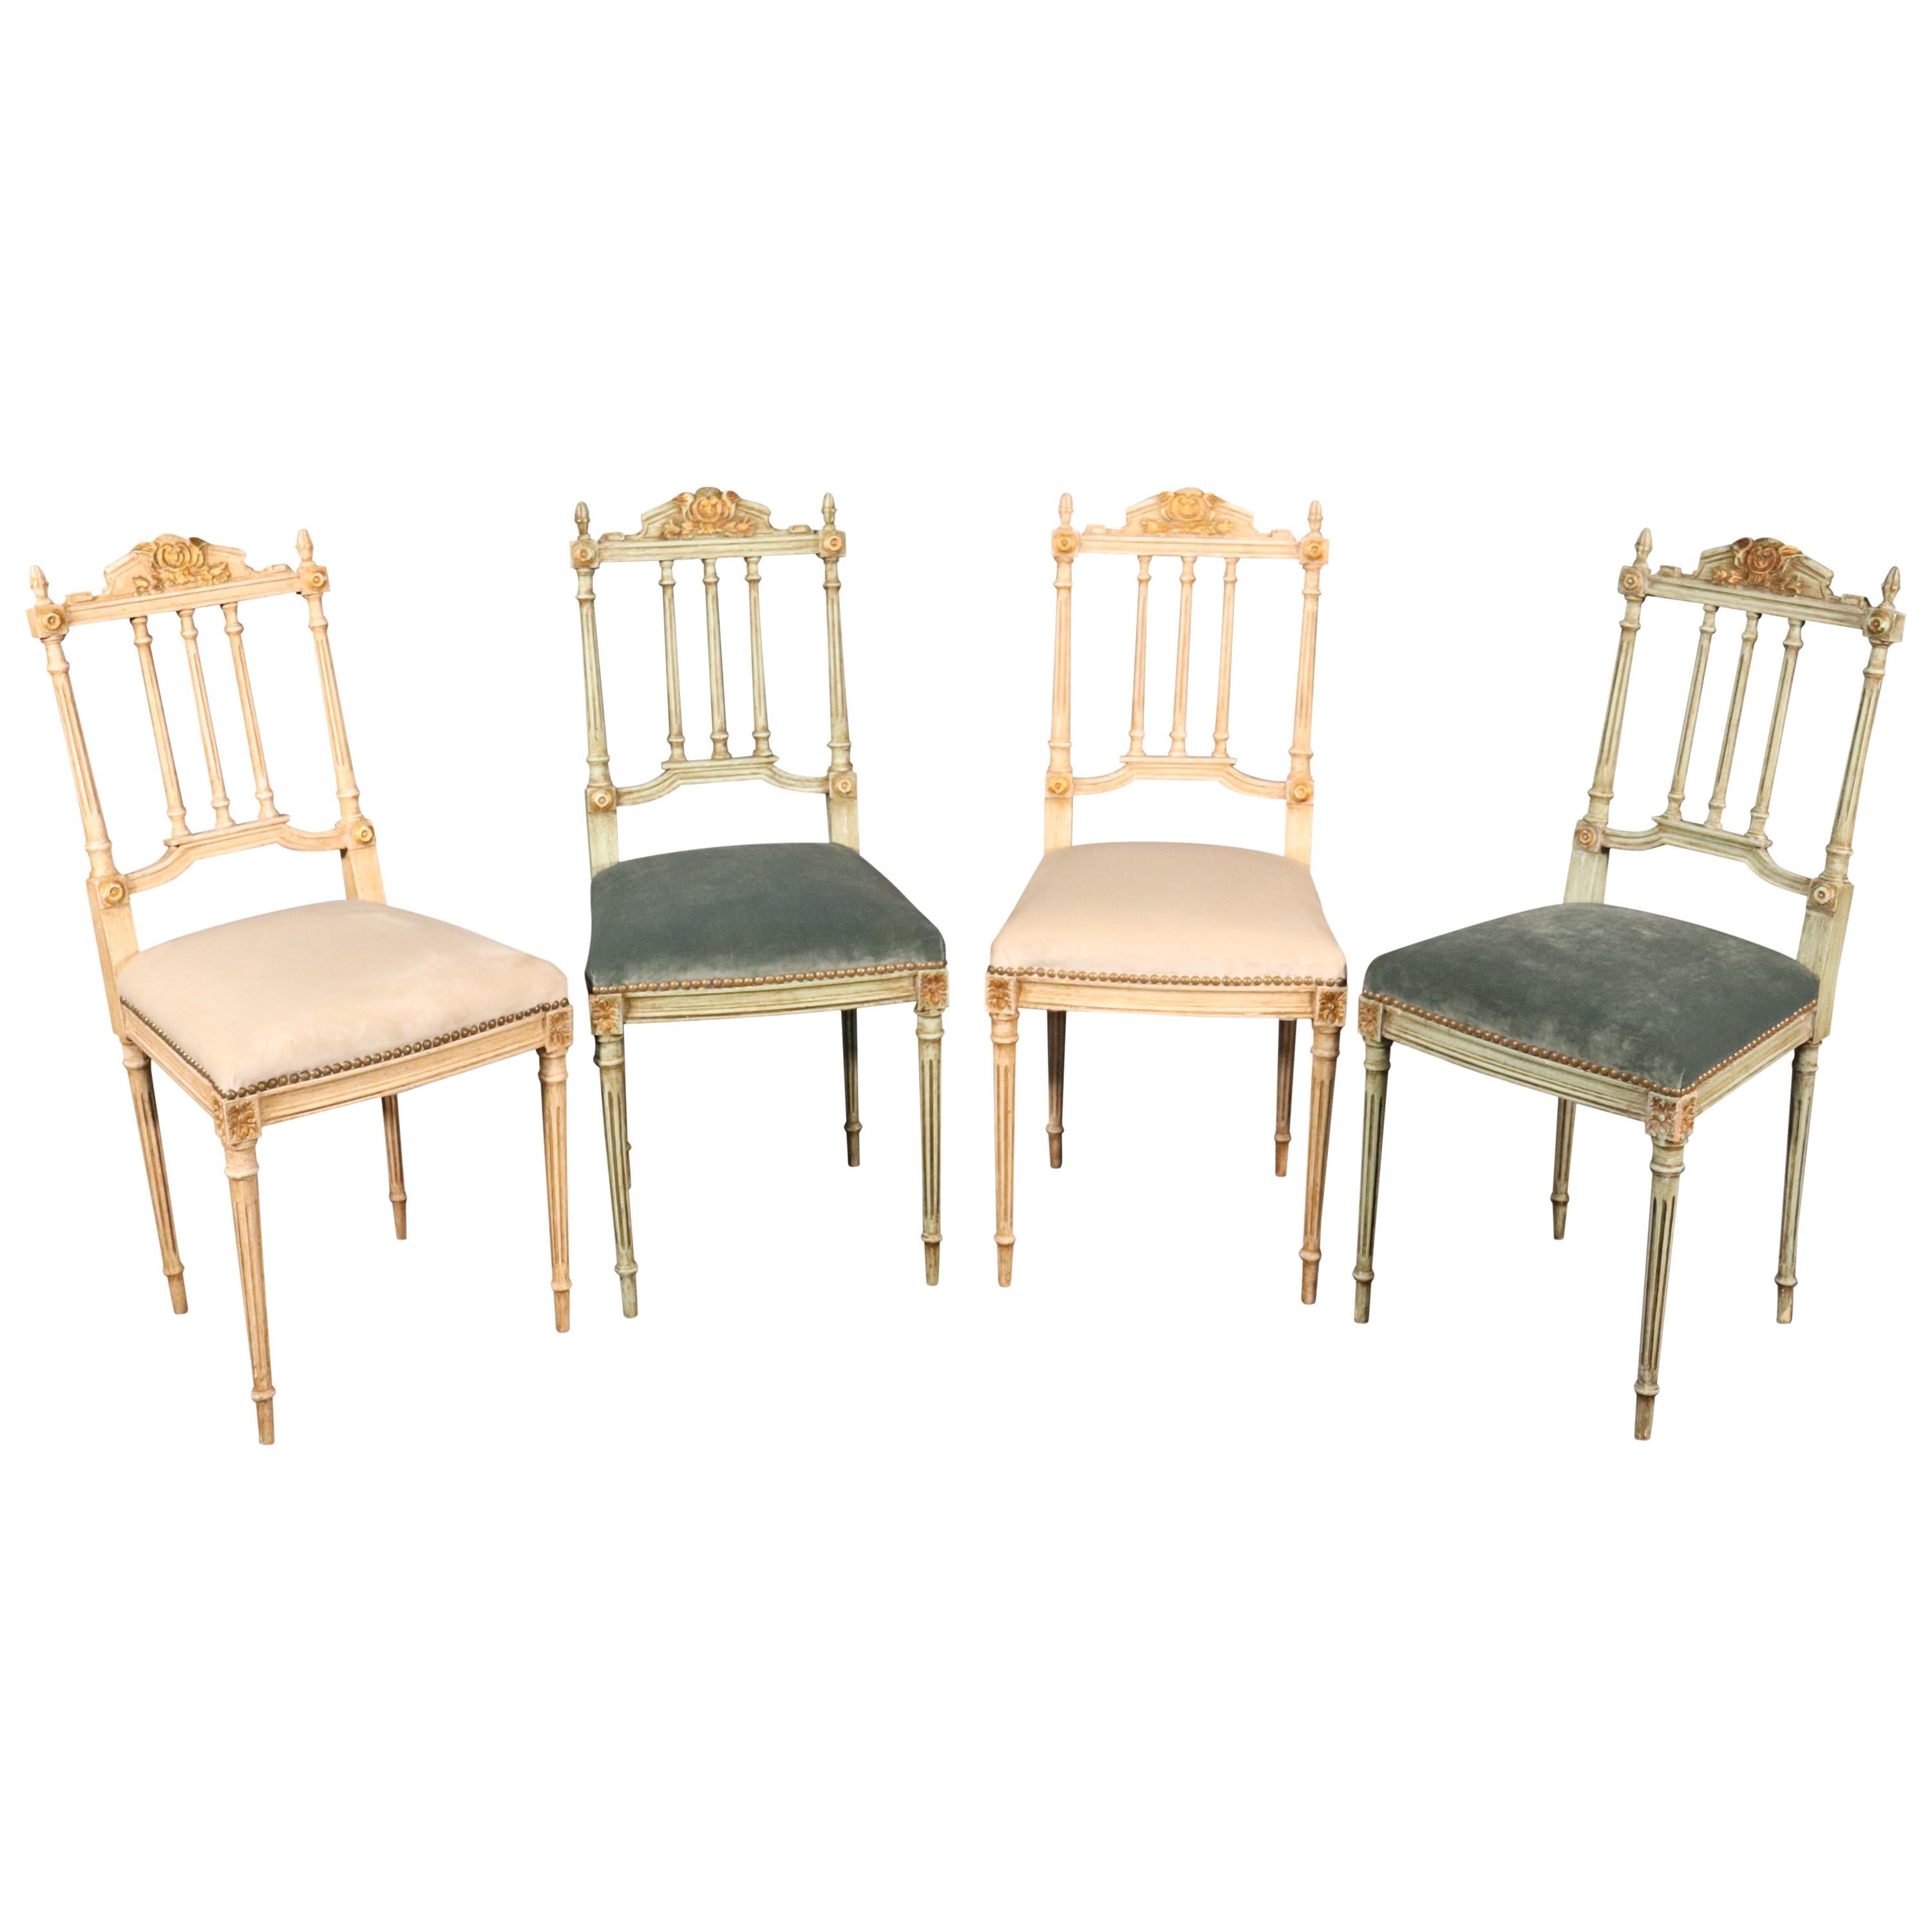 Set of 4 Painted and Gilded Petite French Louis XV Parlor Vanity Chairs